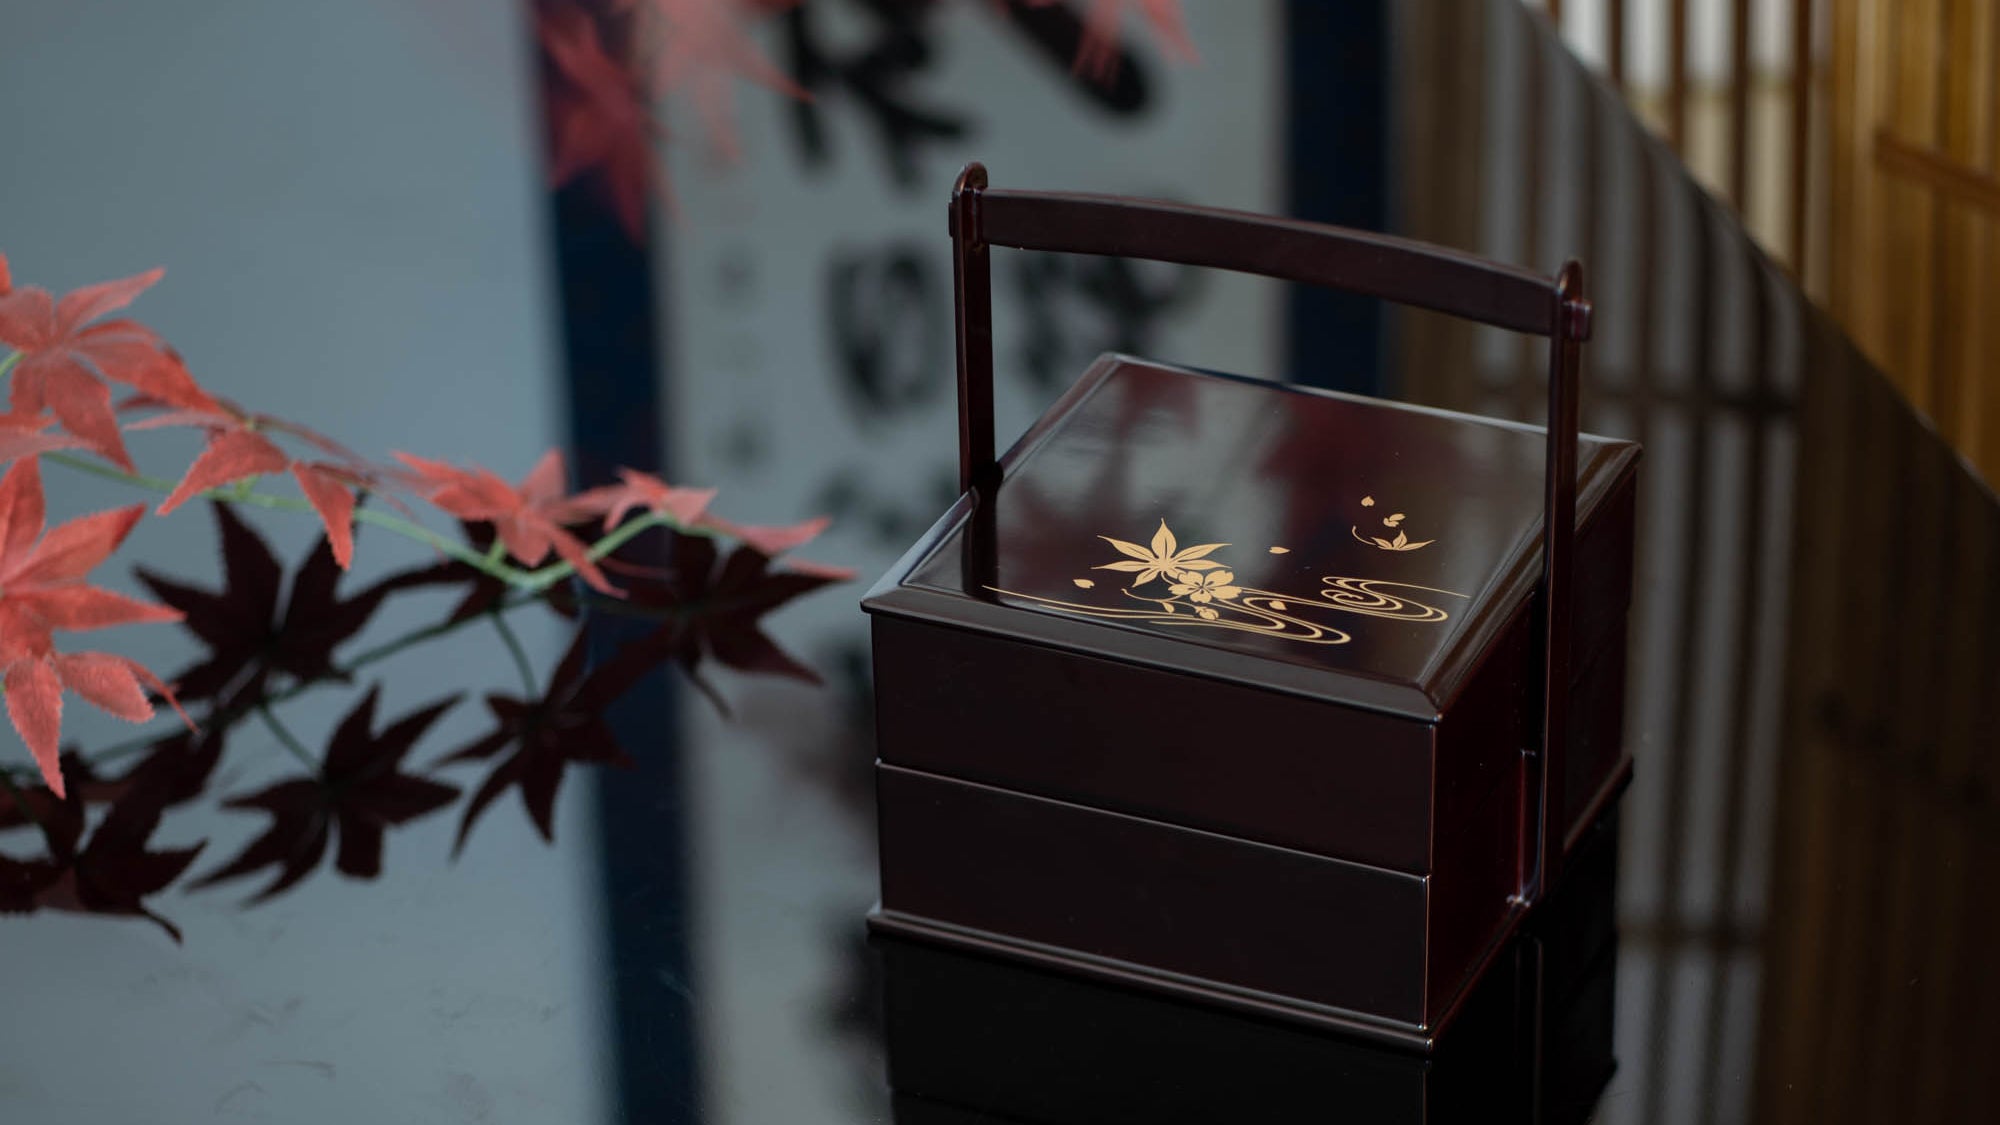 Fall into Elegance: Gift Ideas Featuring Maple and Ginkgo Motifs